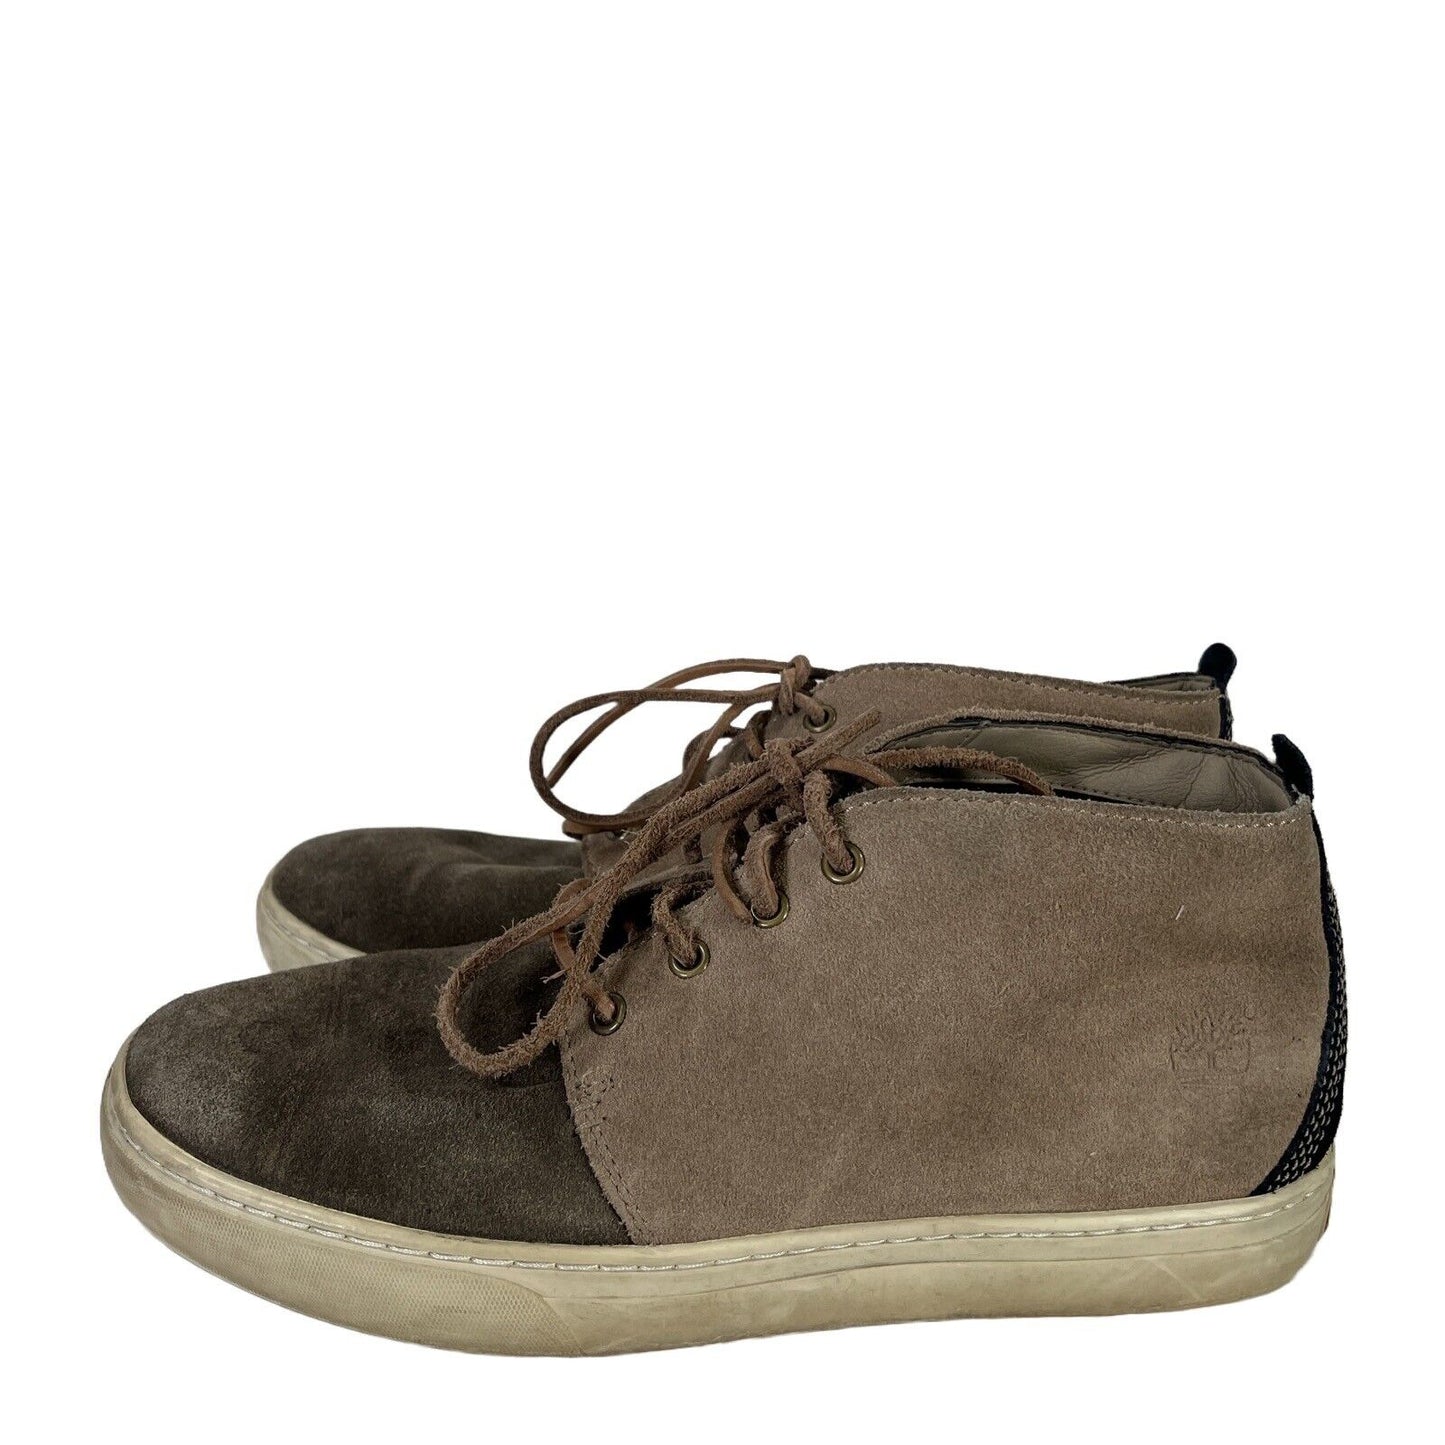 Timberland Men's Gray/Beige Suede Ad 2.0 Cupsole Casual Chukka Boots -9.5